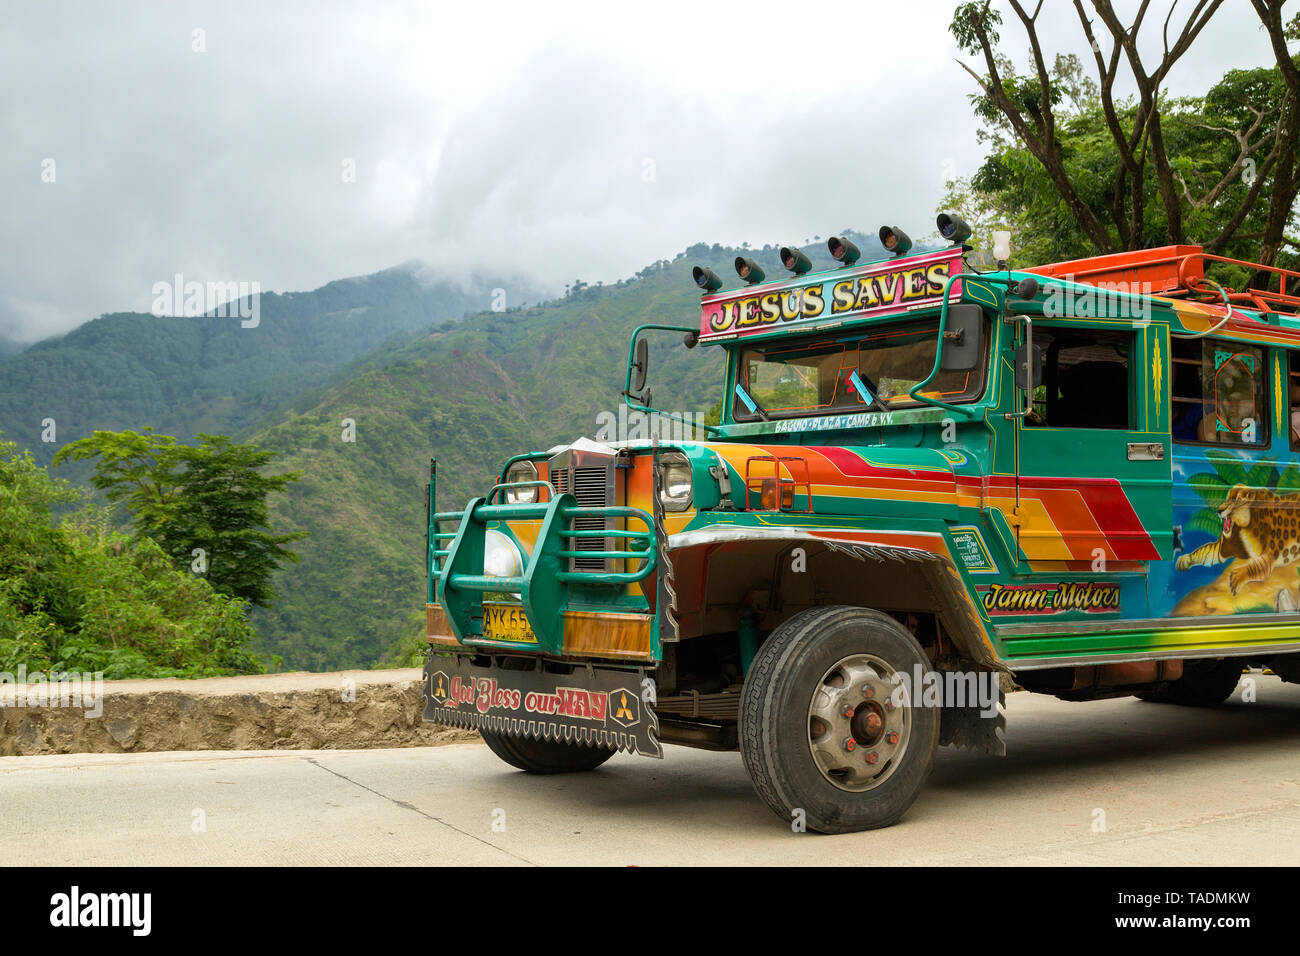 Baguio, Philippines - June 3, 2016: On a mountain road on a colorful jeepney Stock Photo